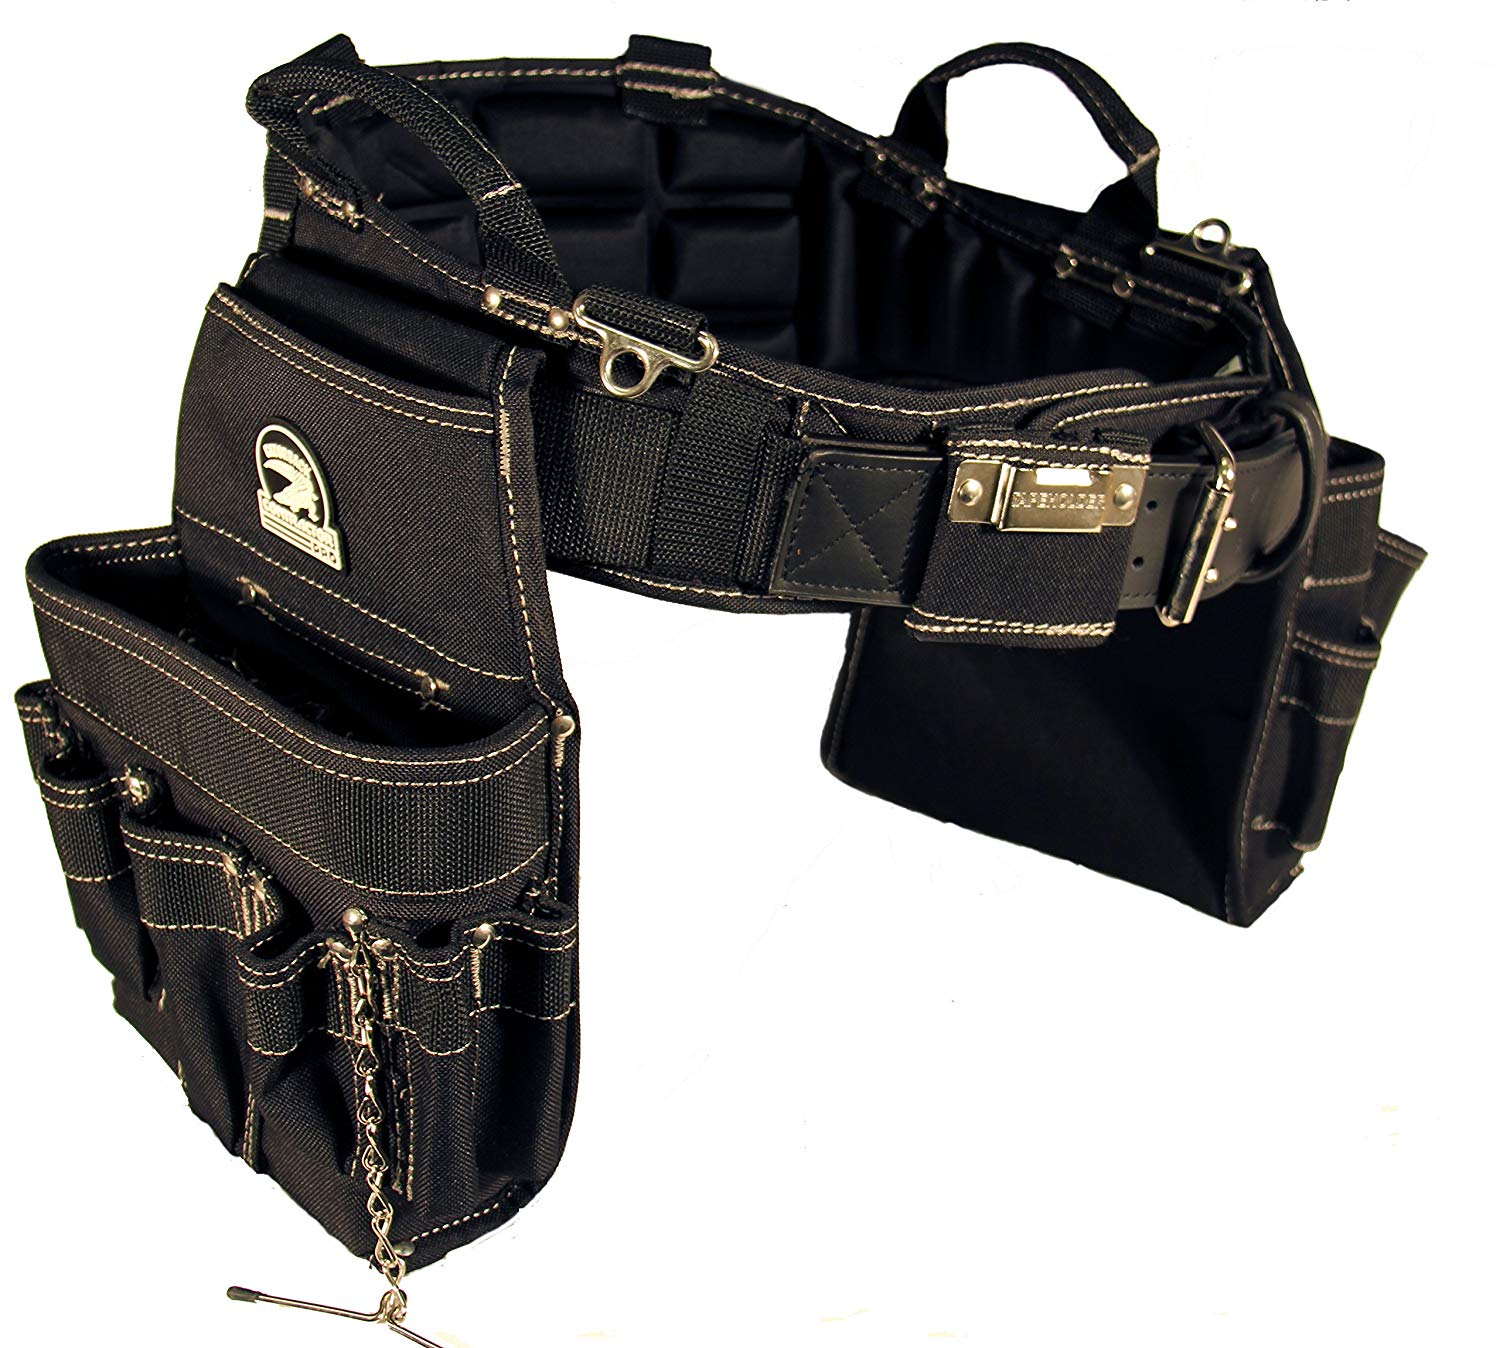 Occidental Leather Tool Belt Size Chart